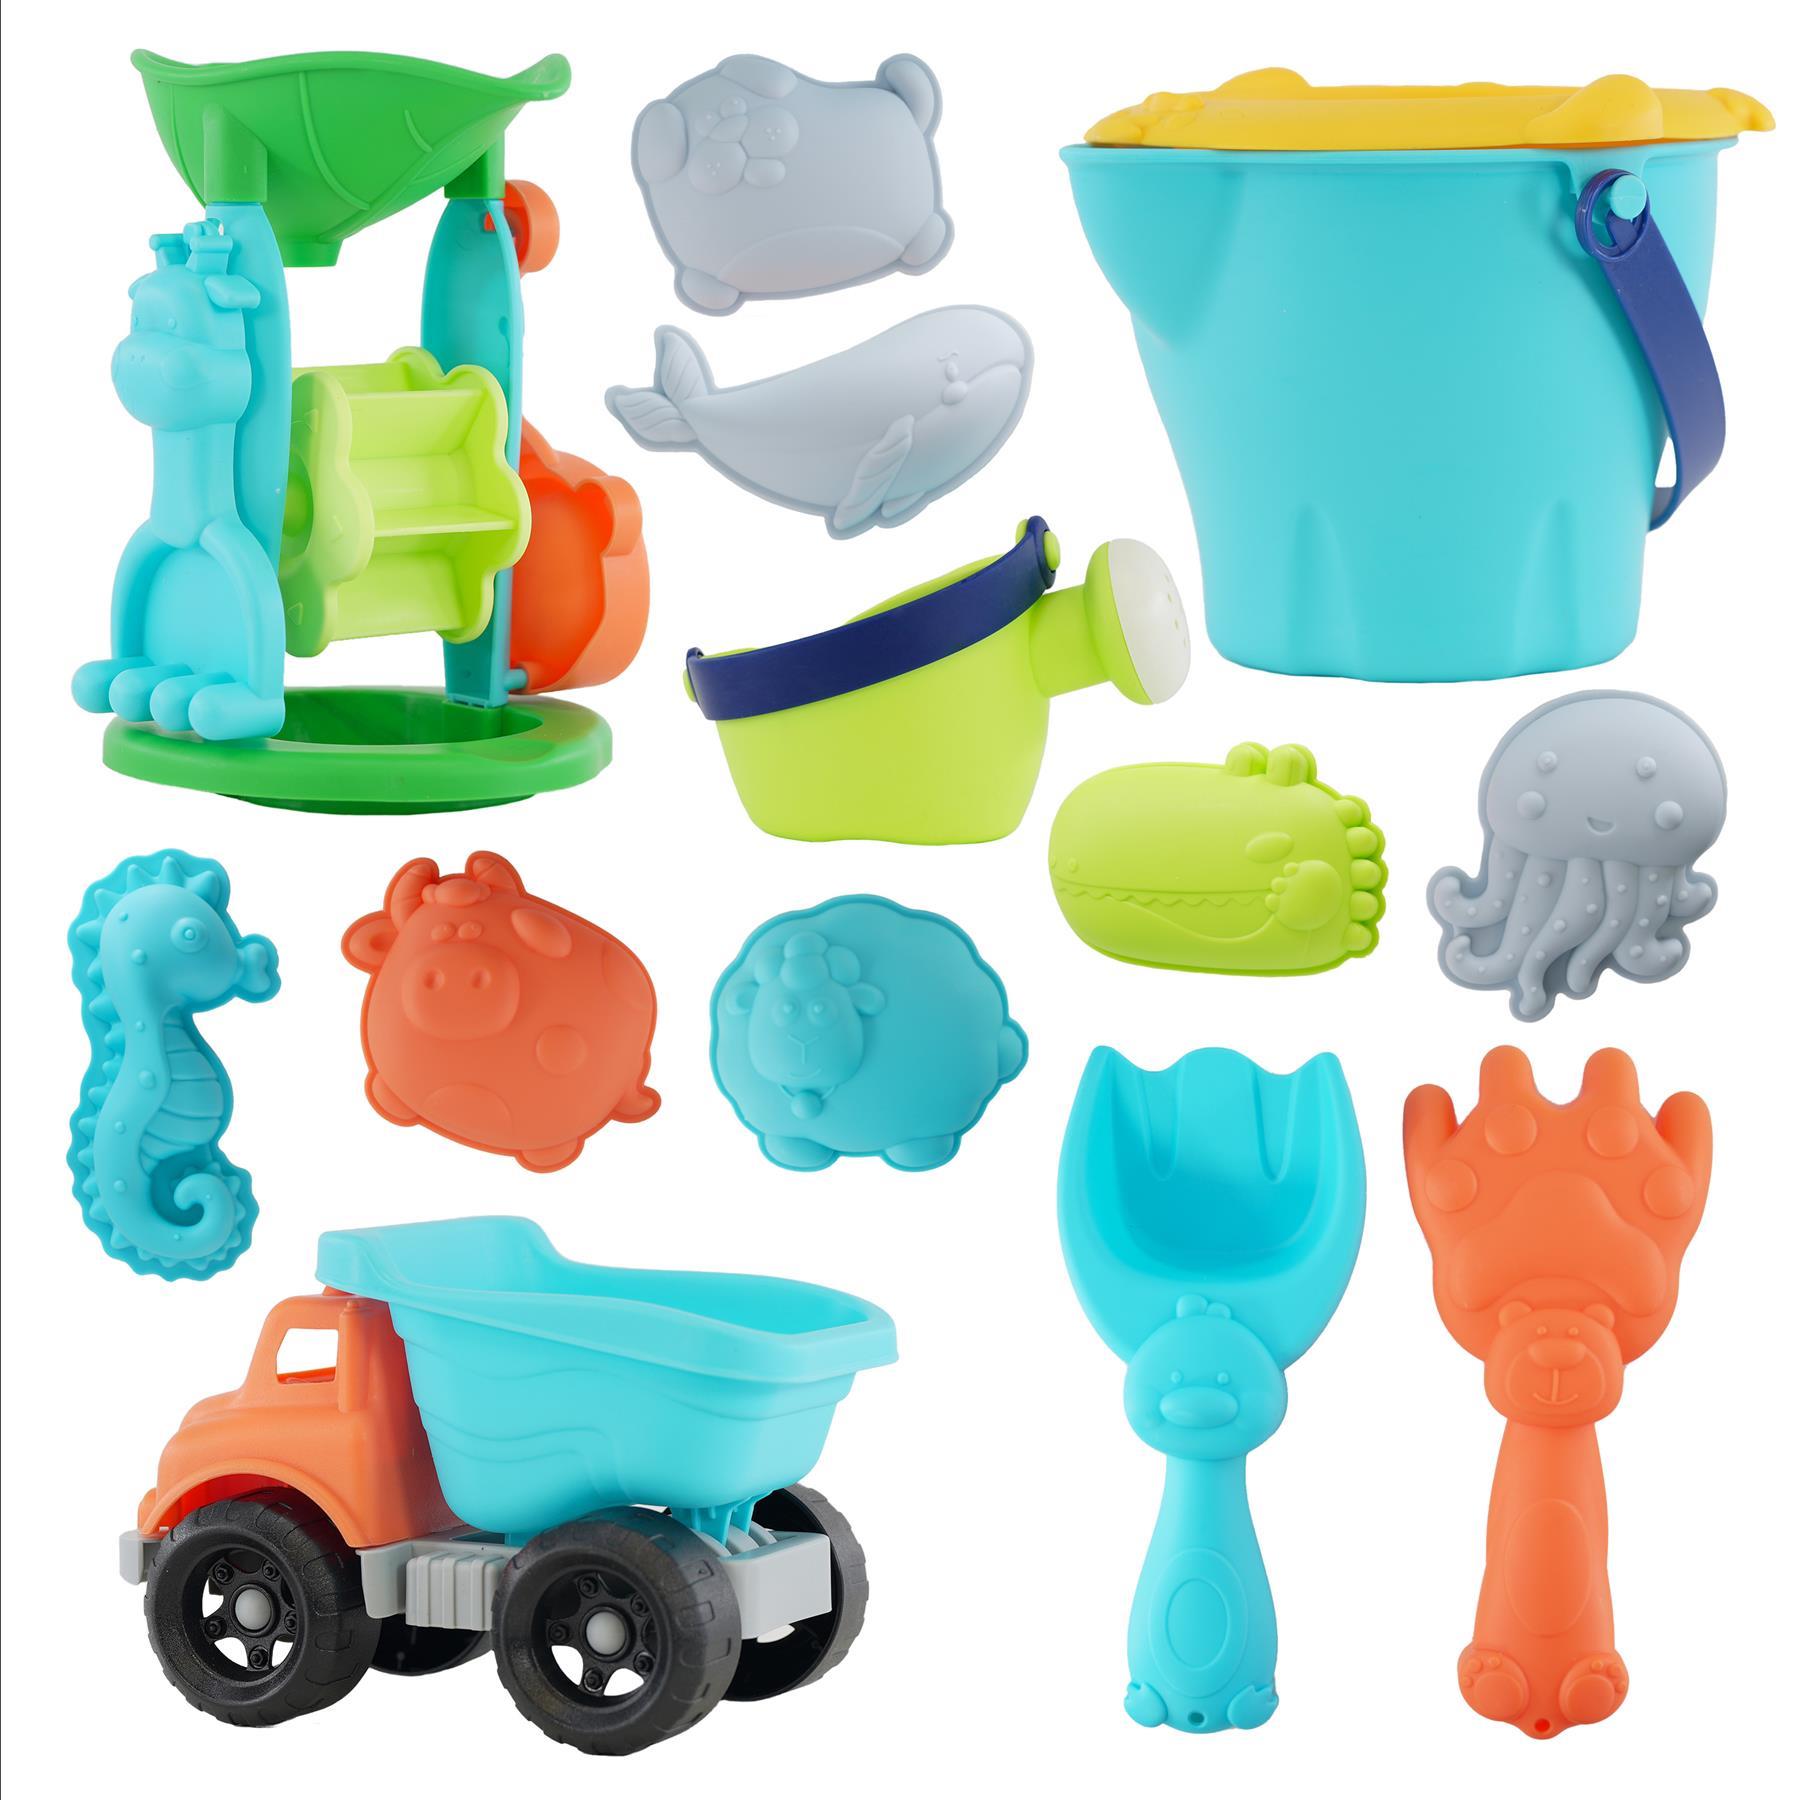 Sand Truck & Accessories Set (16 Pcs.) by The Magic Toy Shop - The Magic Toy Shop